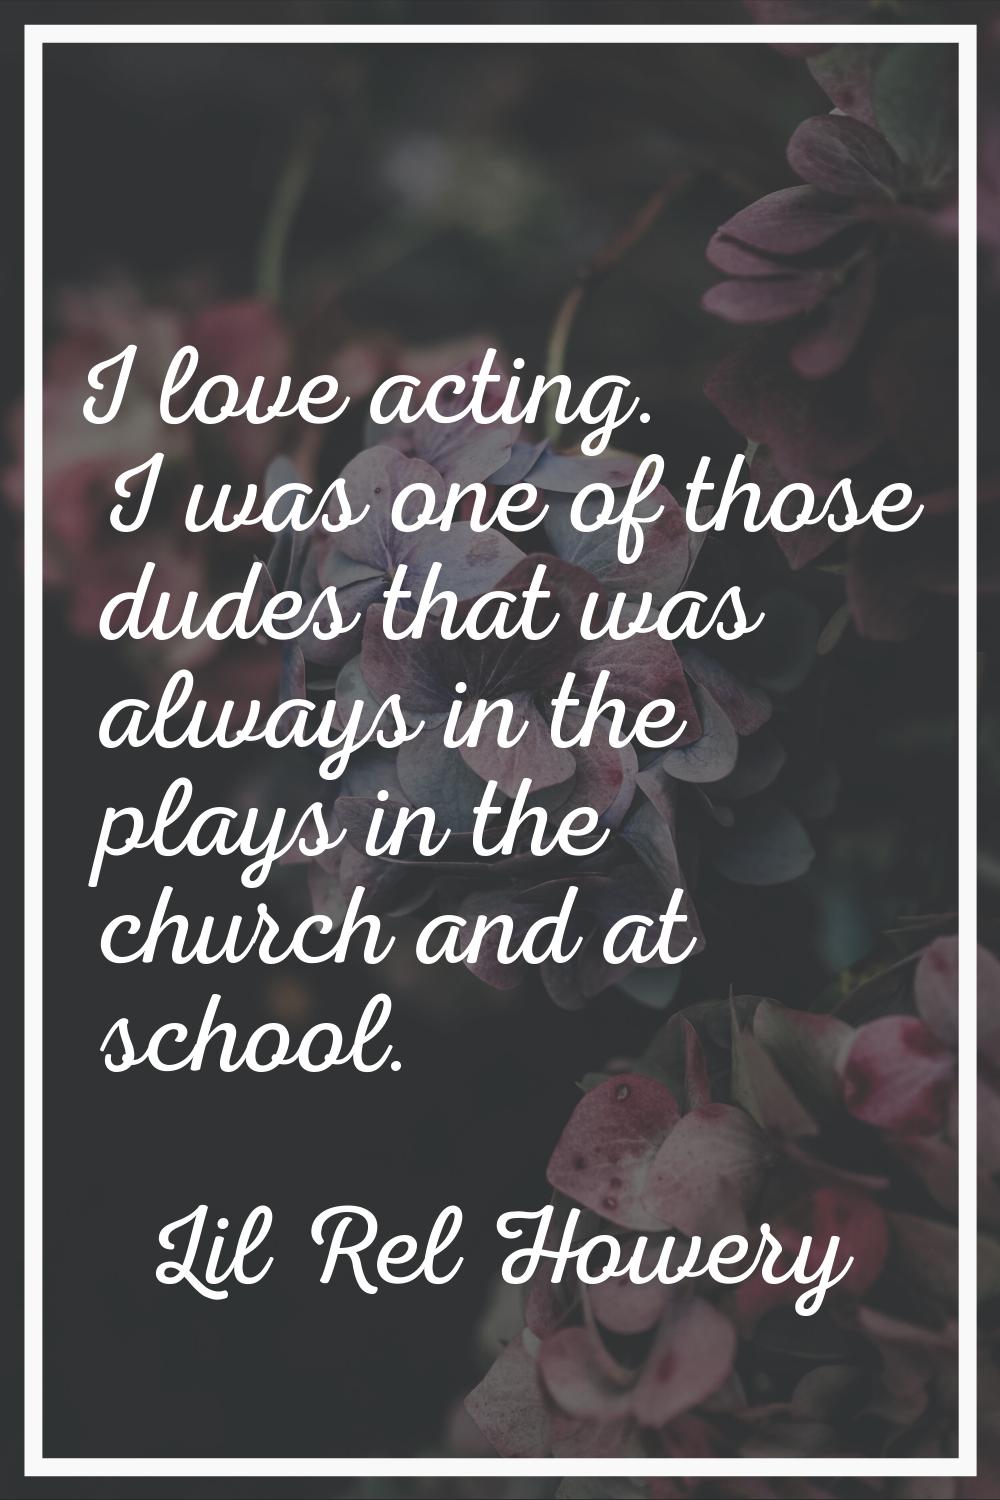 I love acting. I was one of those dudes that was always in the plays in the church and at school.